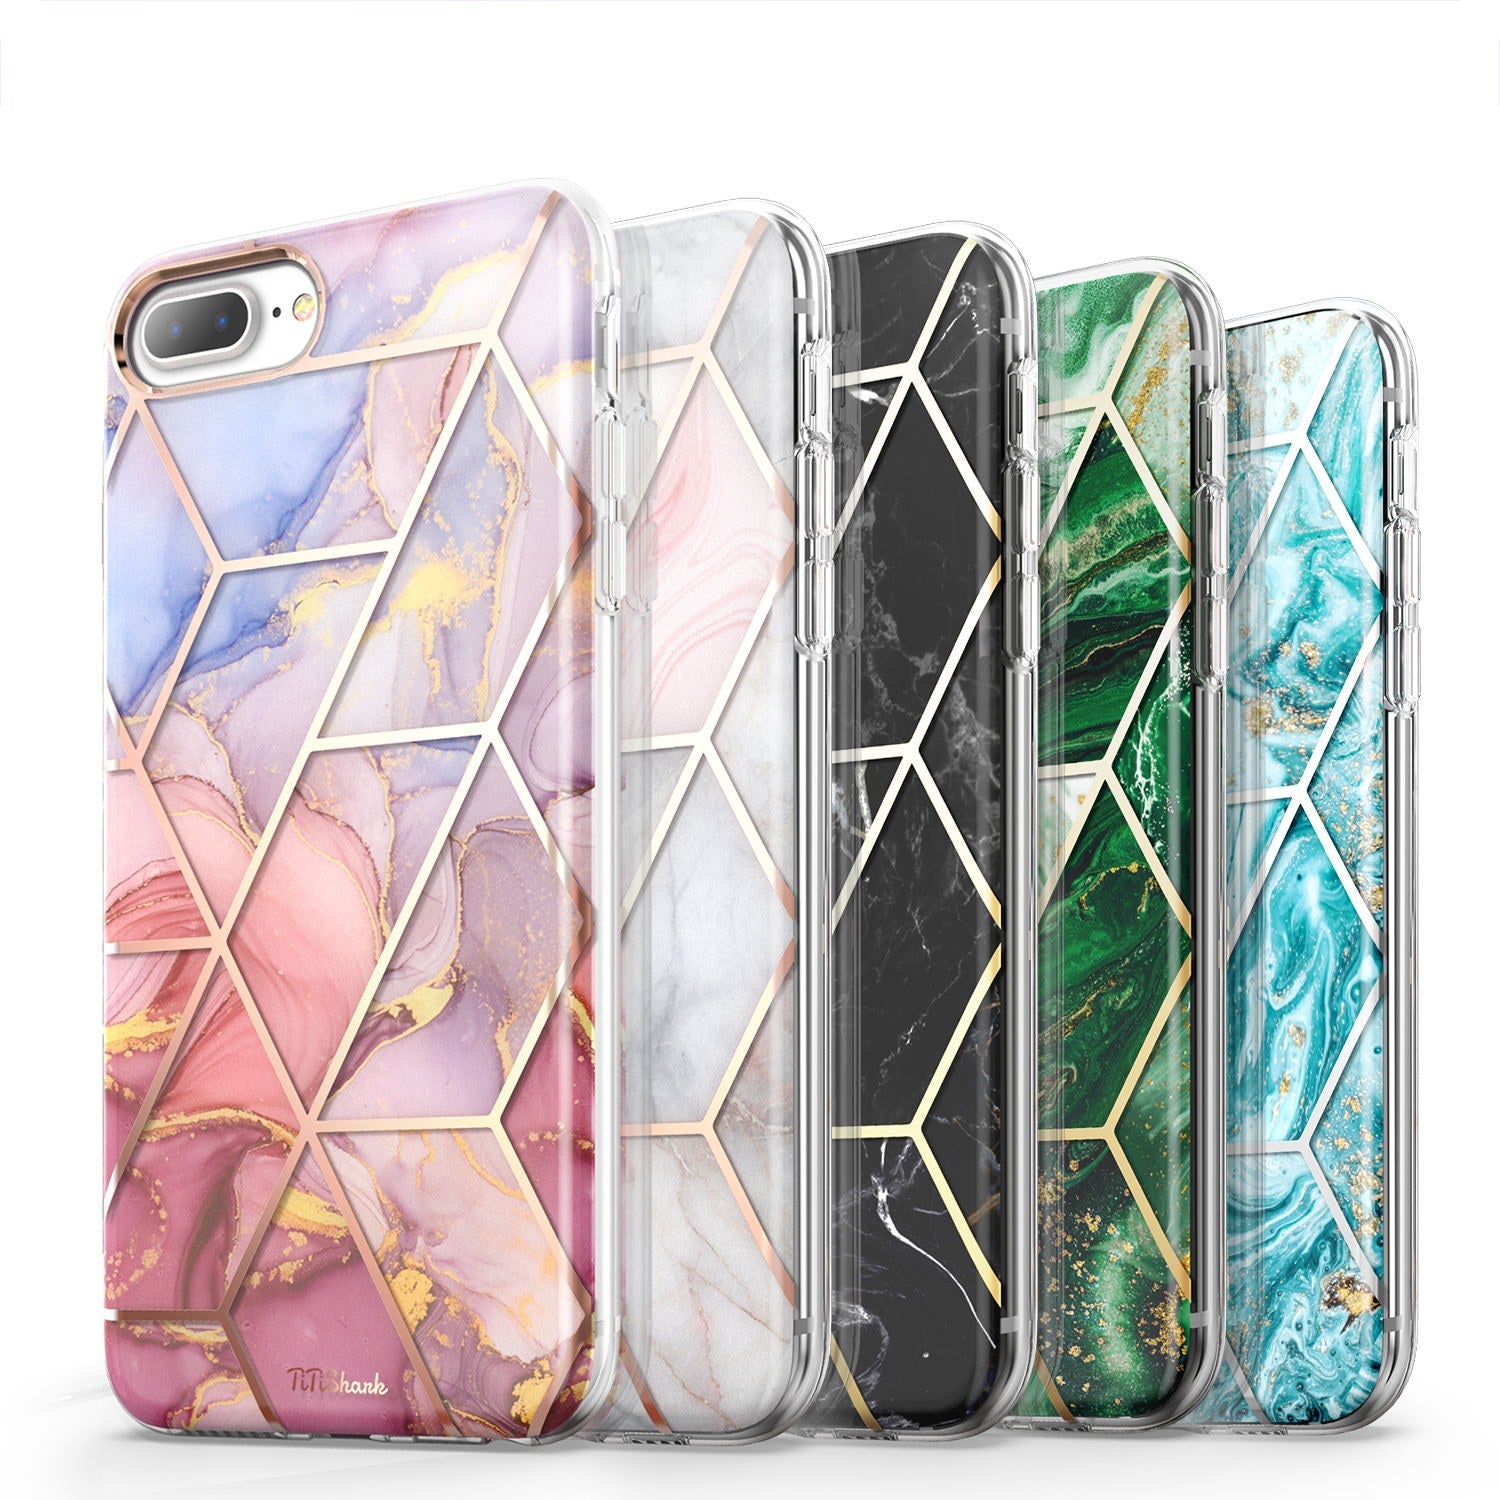 TiTiShark For iPhone 6/6s/7/8 Case Clear Marble Fashion Shockproof Cover